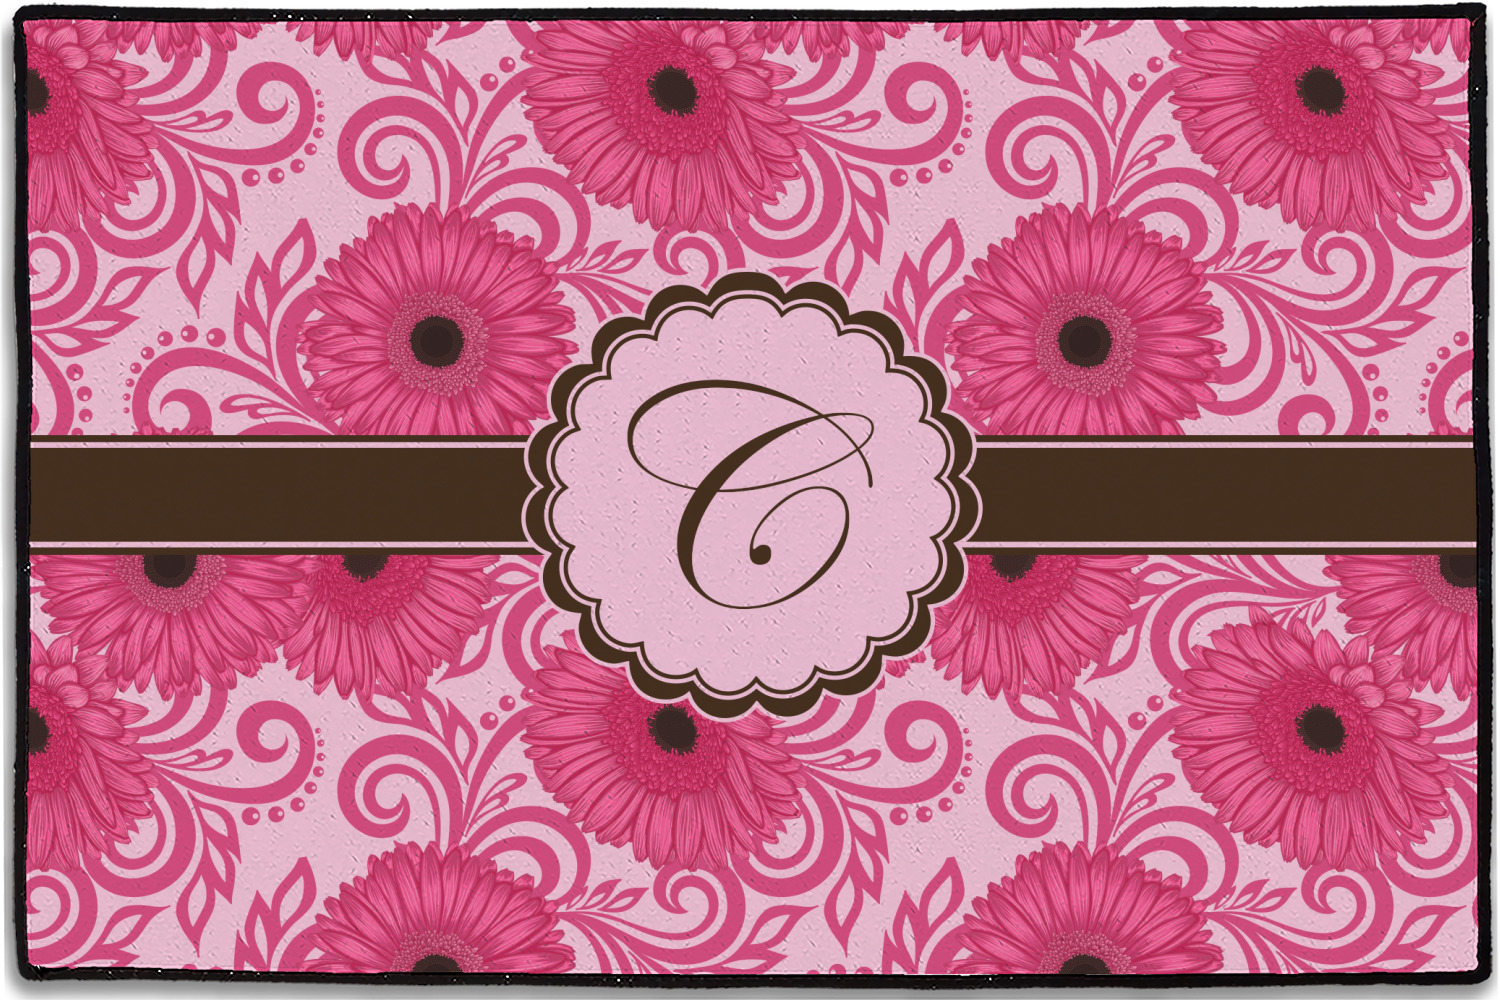 https://www.youcustomizeit.com/common/MAKE/319441/Gerbera-Daisy-Personalized-Door-Mat-36x24-APPROVAL.jpg?lm=1601052312